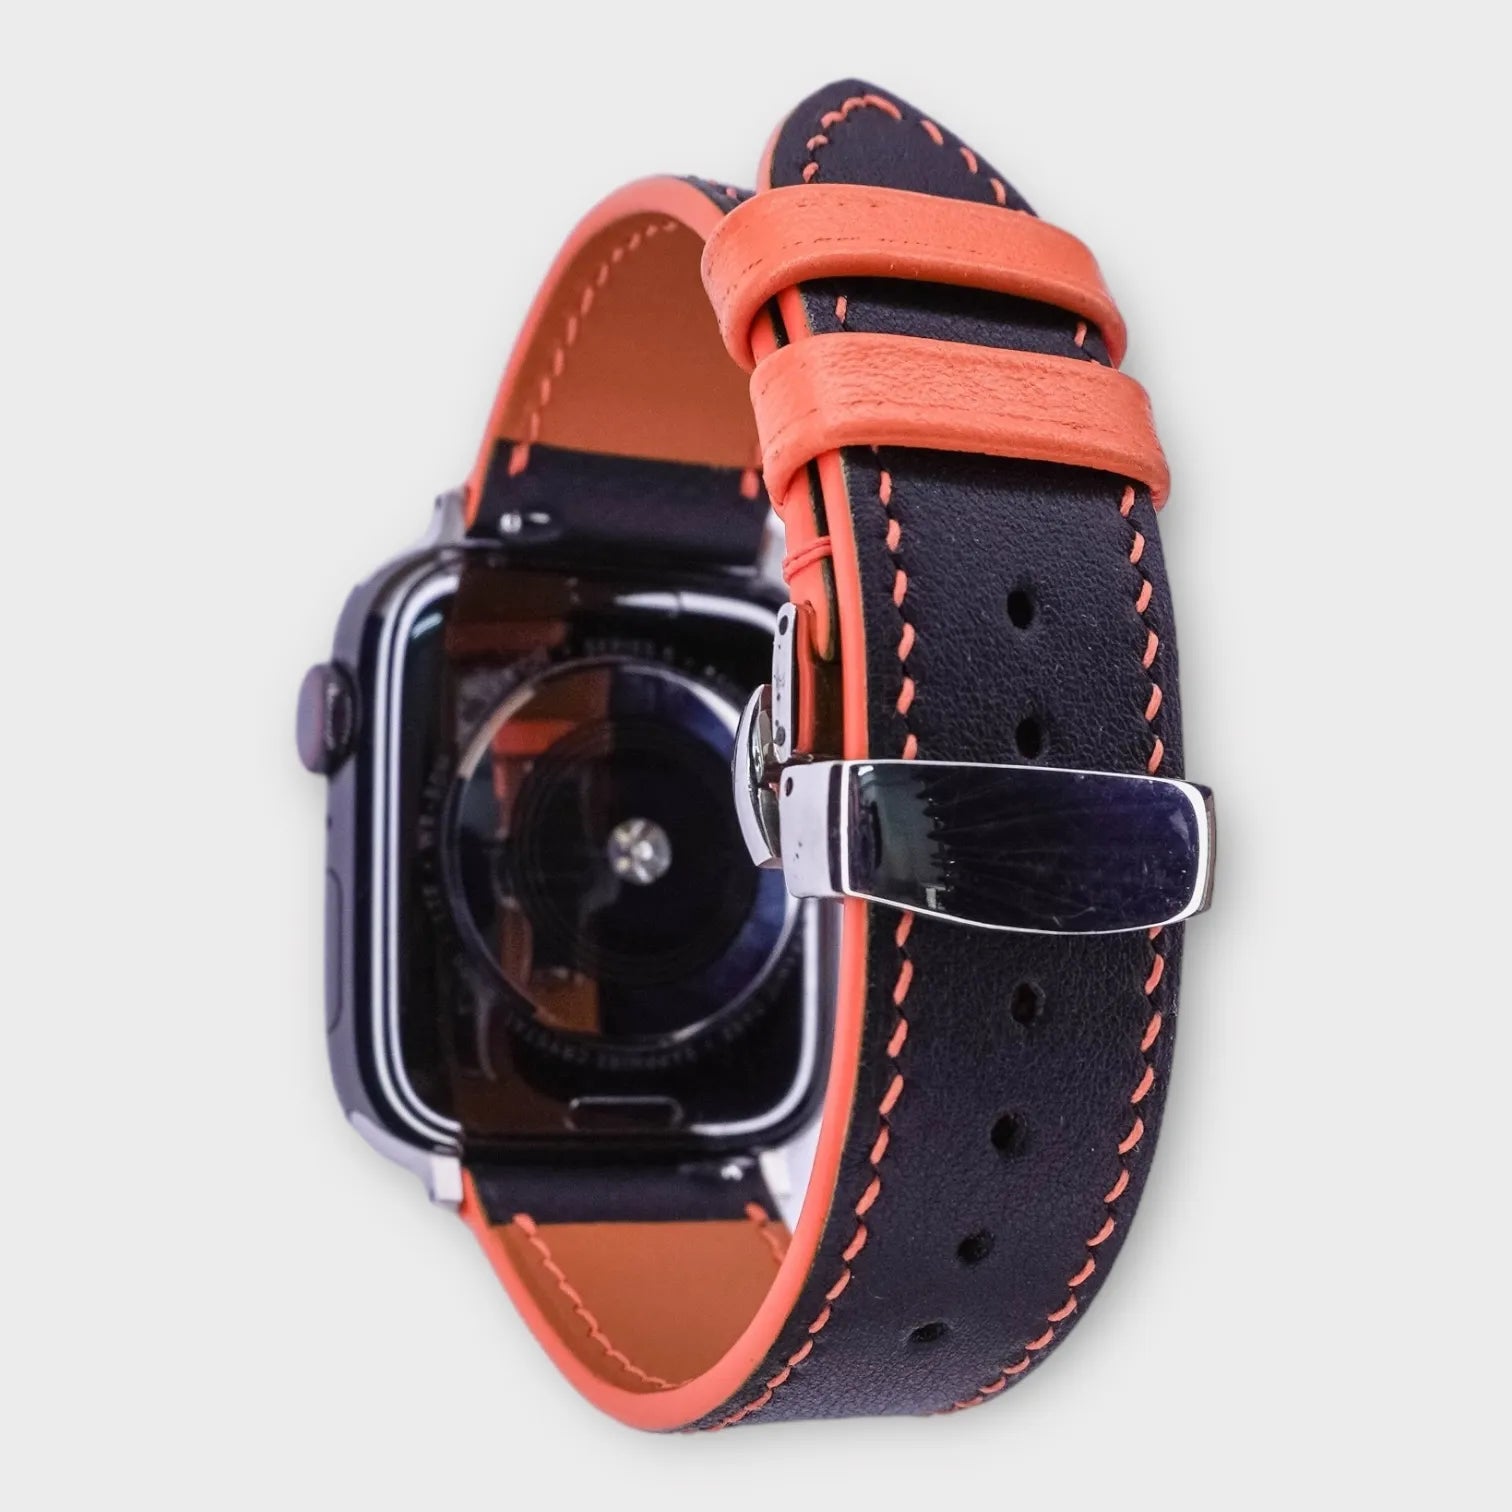 Striking apple watch leather band in black and orange Swift leather, vibrant and bold.